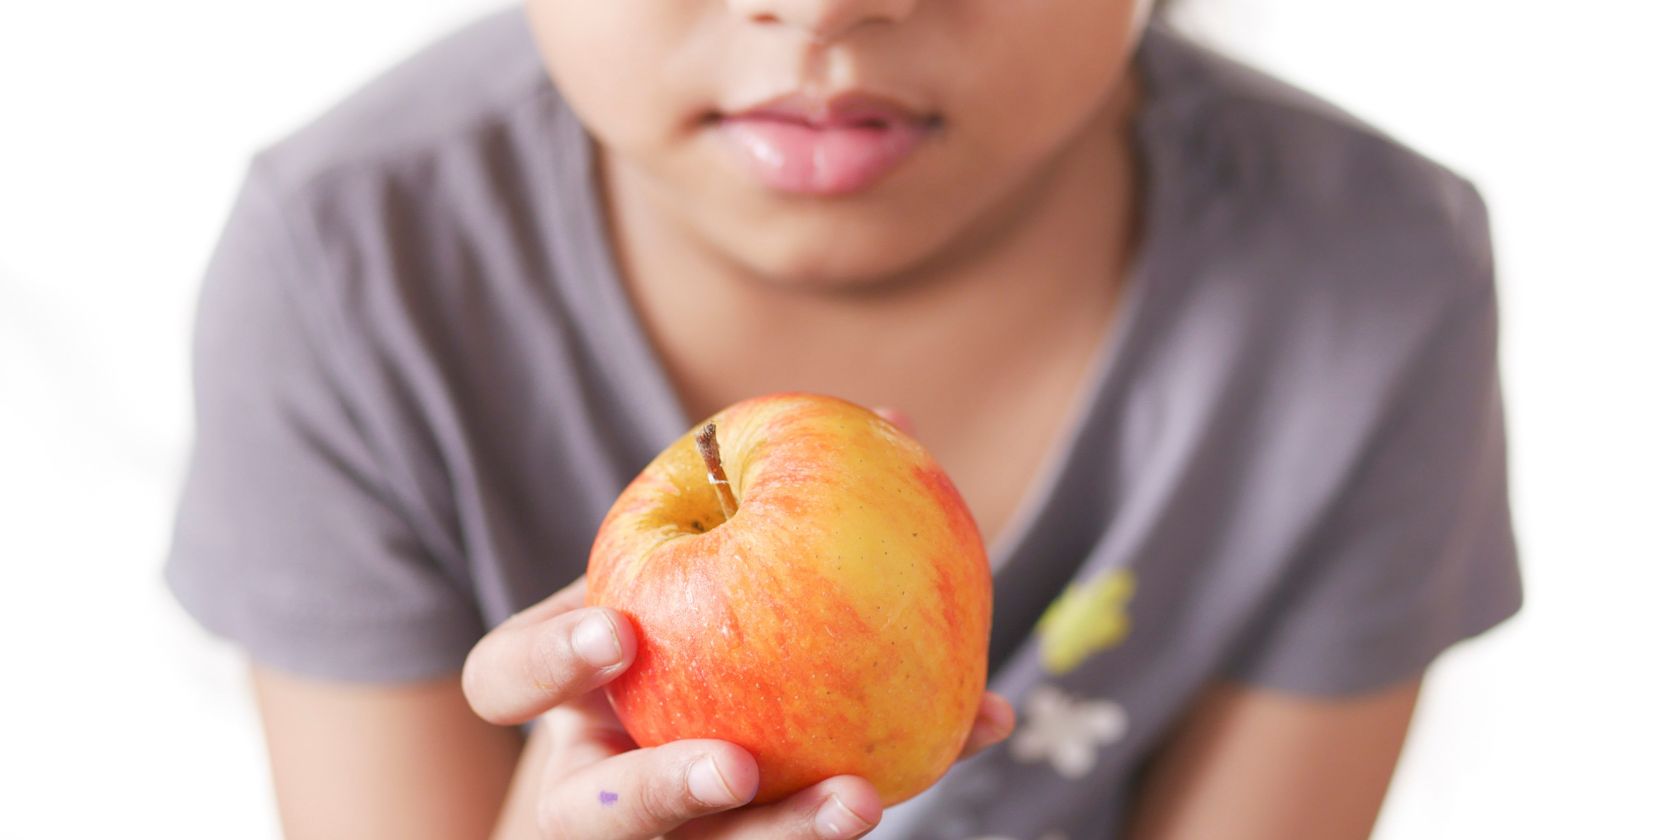 The Top 10 Apps and Websites for Children’s Nutrition